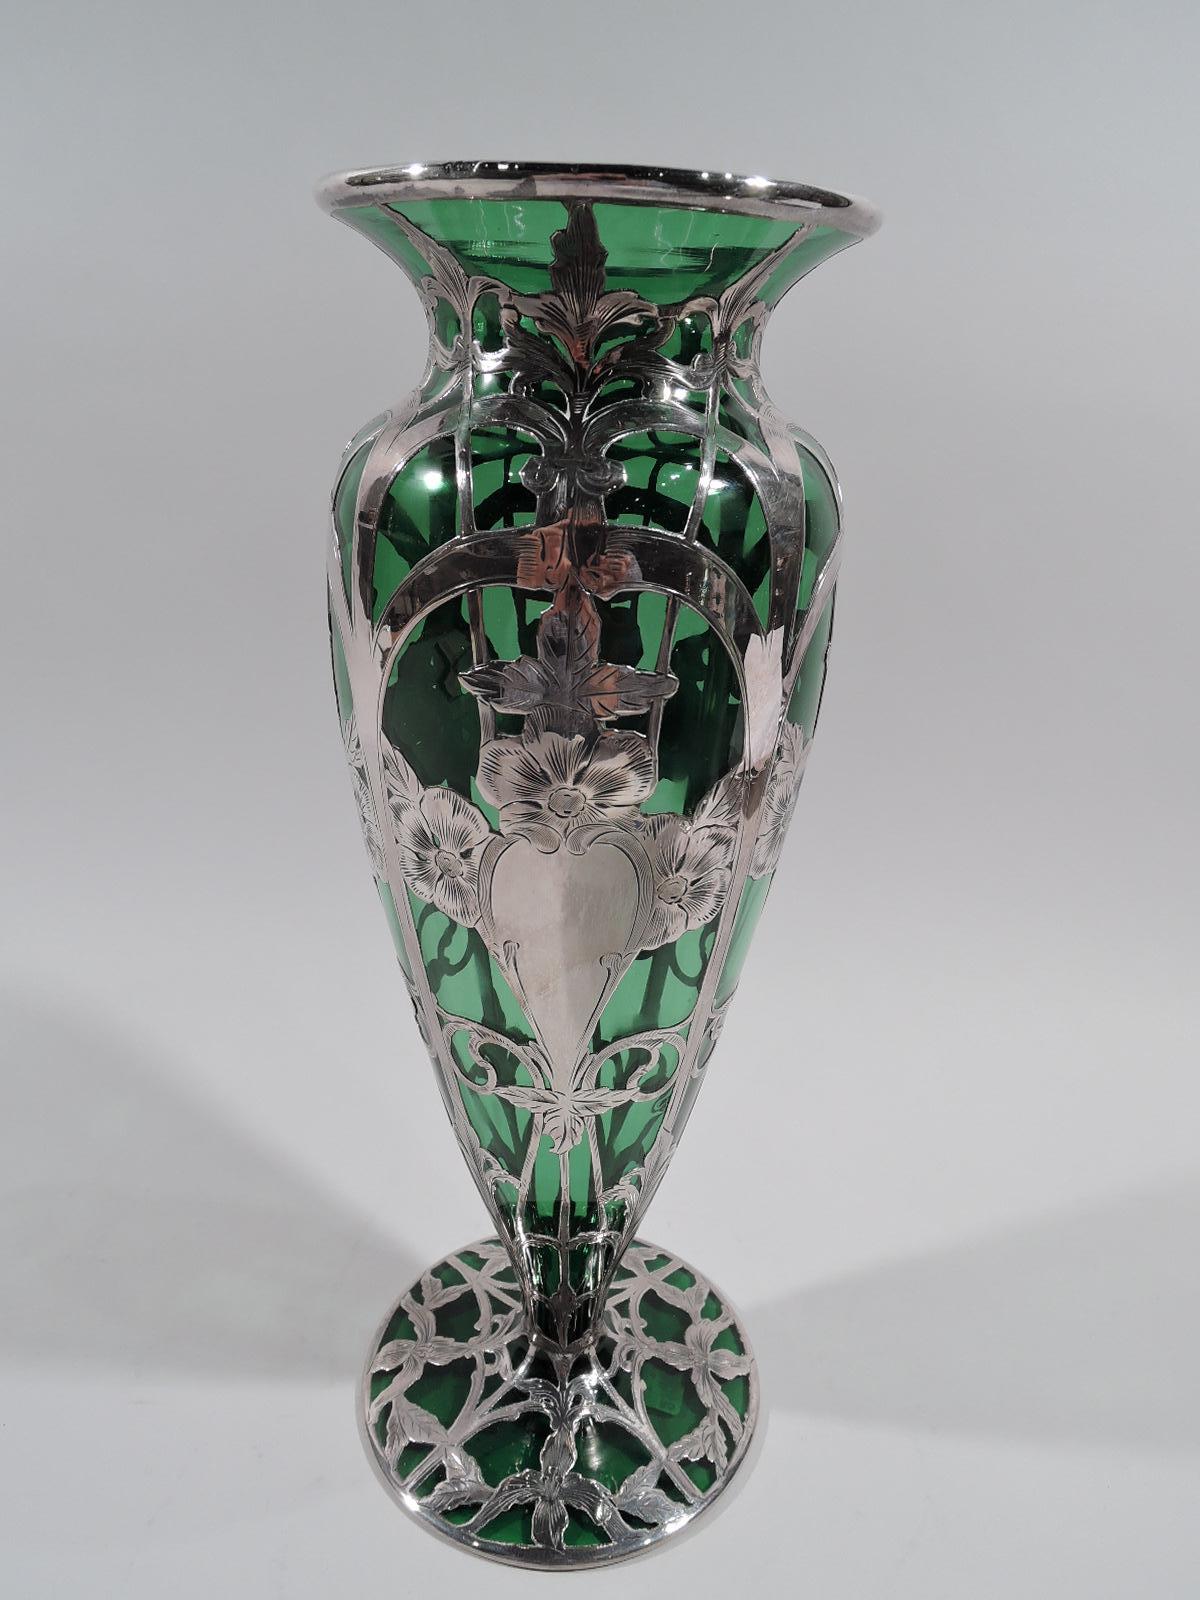 Turn-of-the-century Art Nouveau glass vase with engraved, silver overlay. Made by Alvin in Providence. Curved and tapering sides, short neck with flared rim, and round and slightly raised foot. Structured and vertical overlay in form of arched